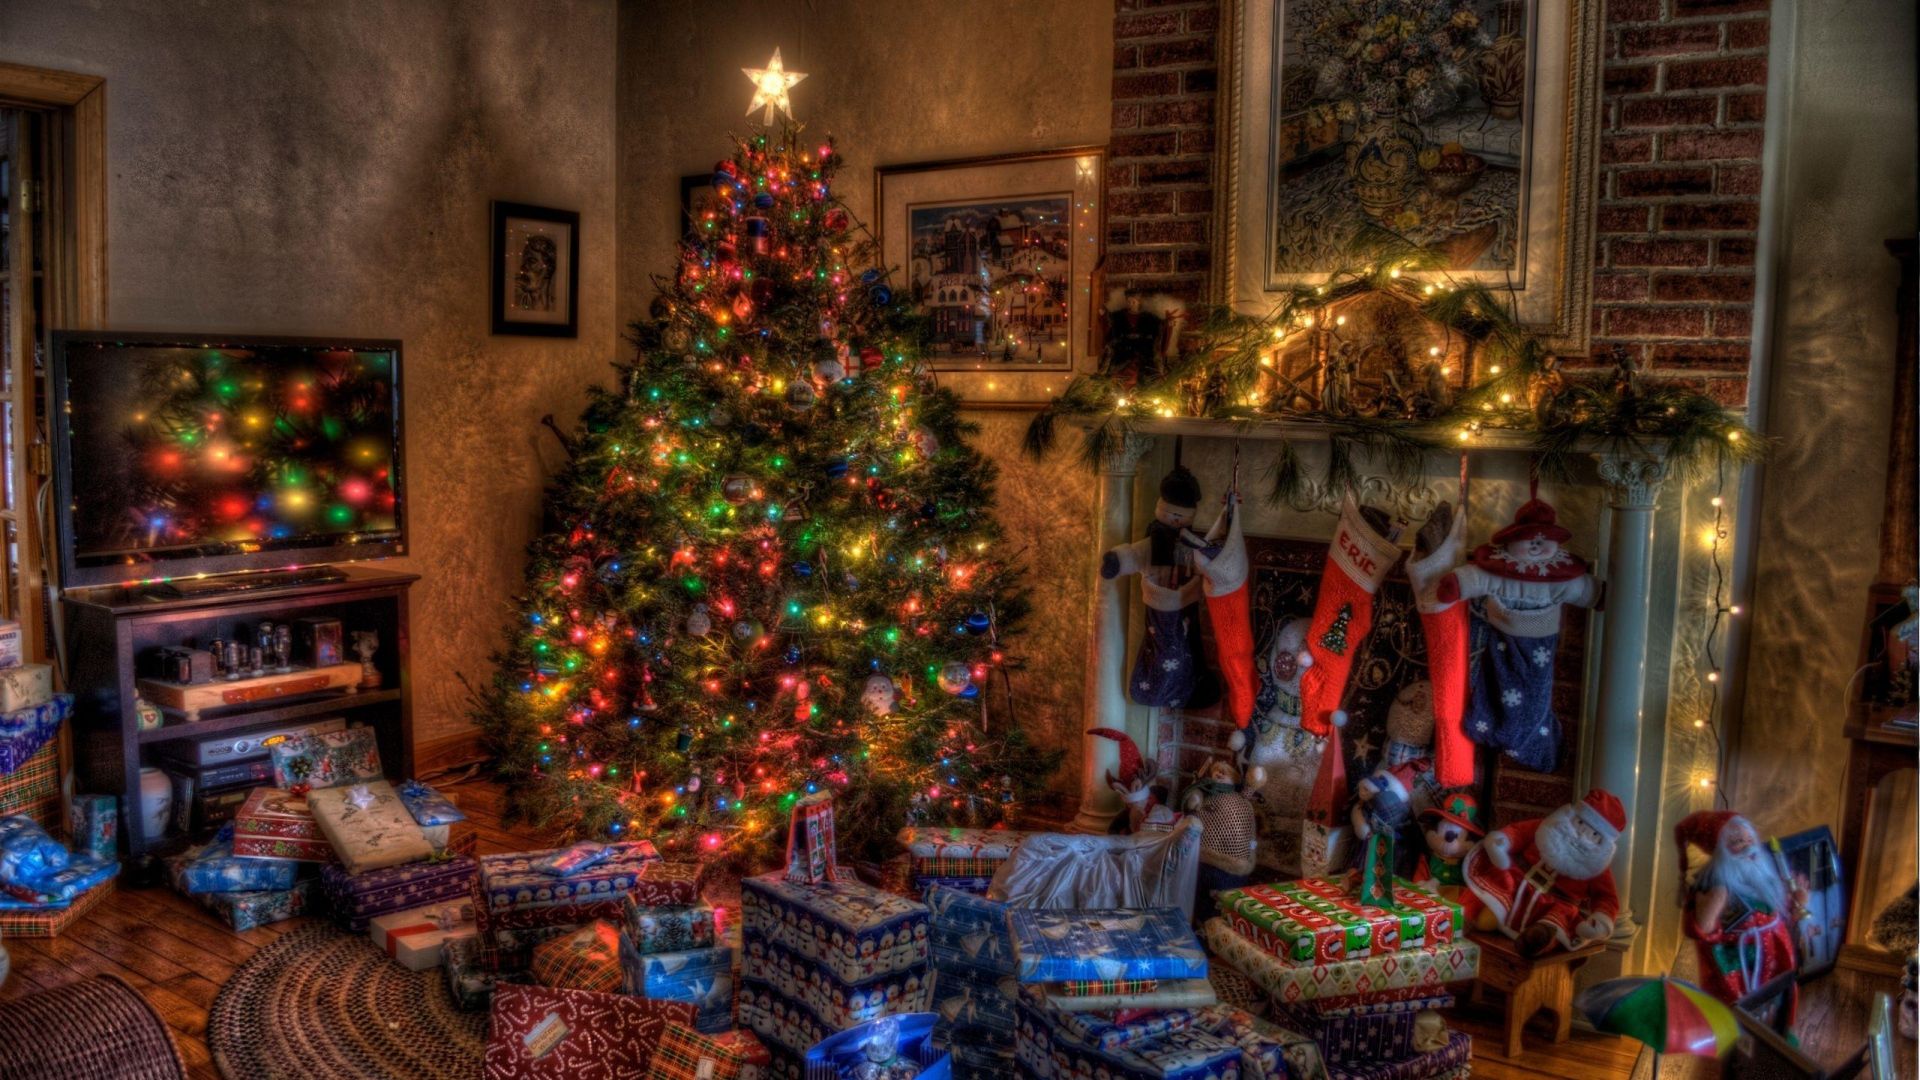 Download Wallpaper 1920x1080 tree, christmas, presents, fireplace, wreath, home, comfort Full HD 1080p HD Background